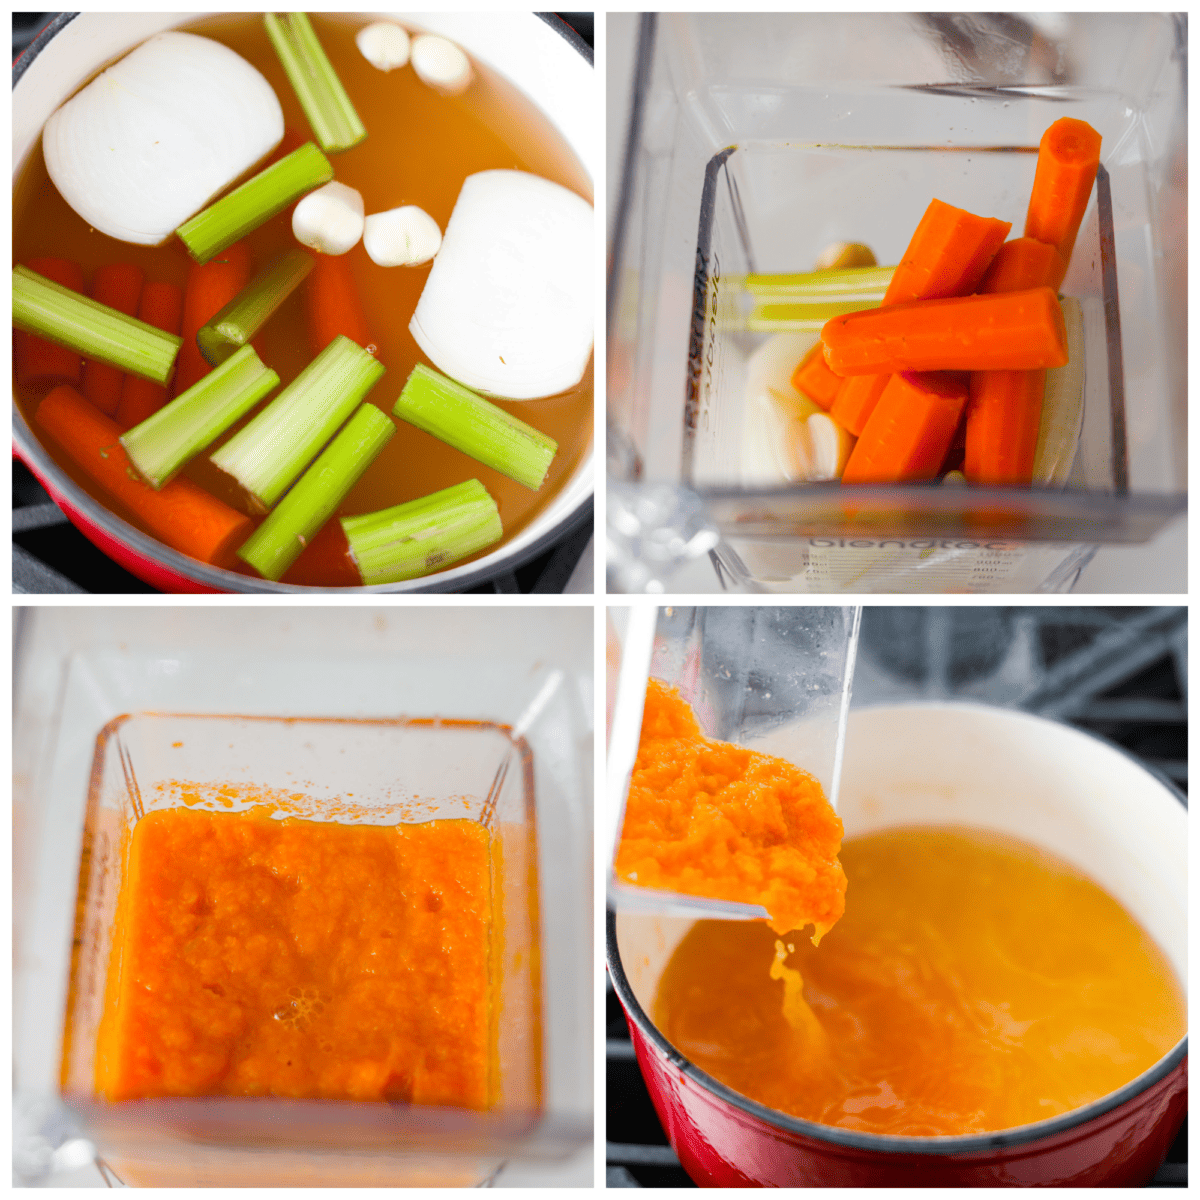 4-photo collage of the homemade broth being prepared. Vegetables are simmered until soft, then blended.